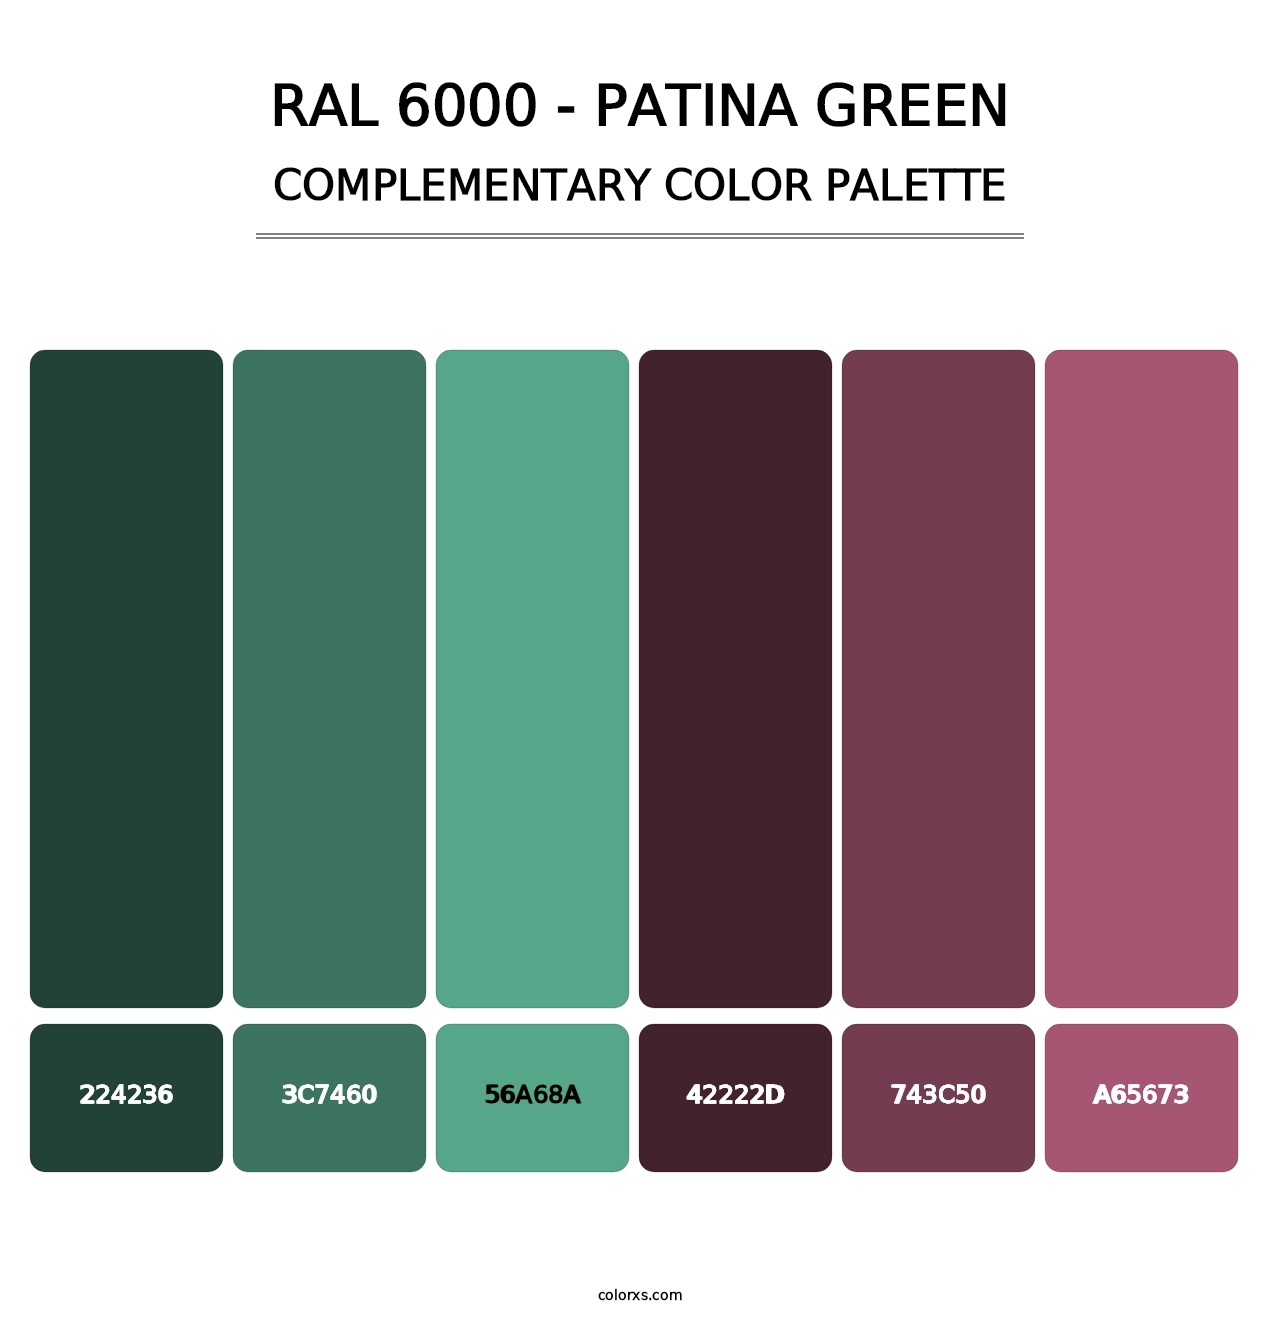 RAL 6000 - Patina Green - Complementary Color Palette